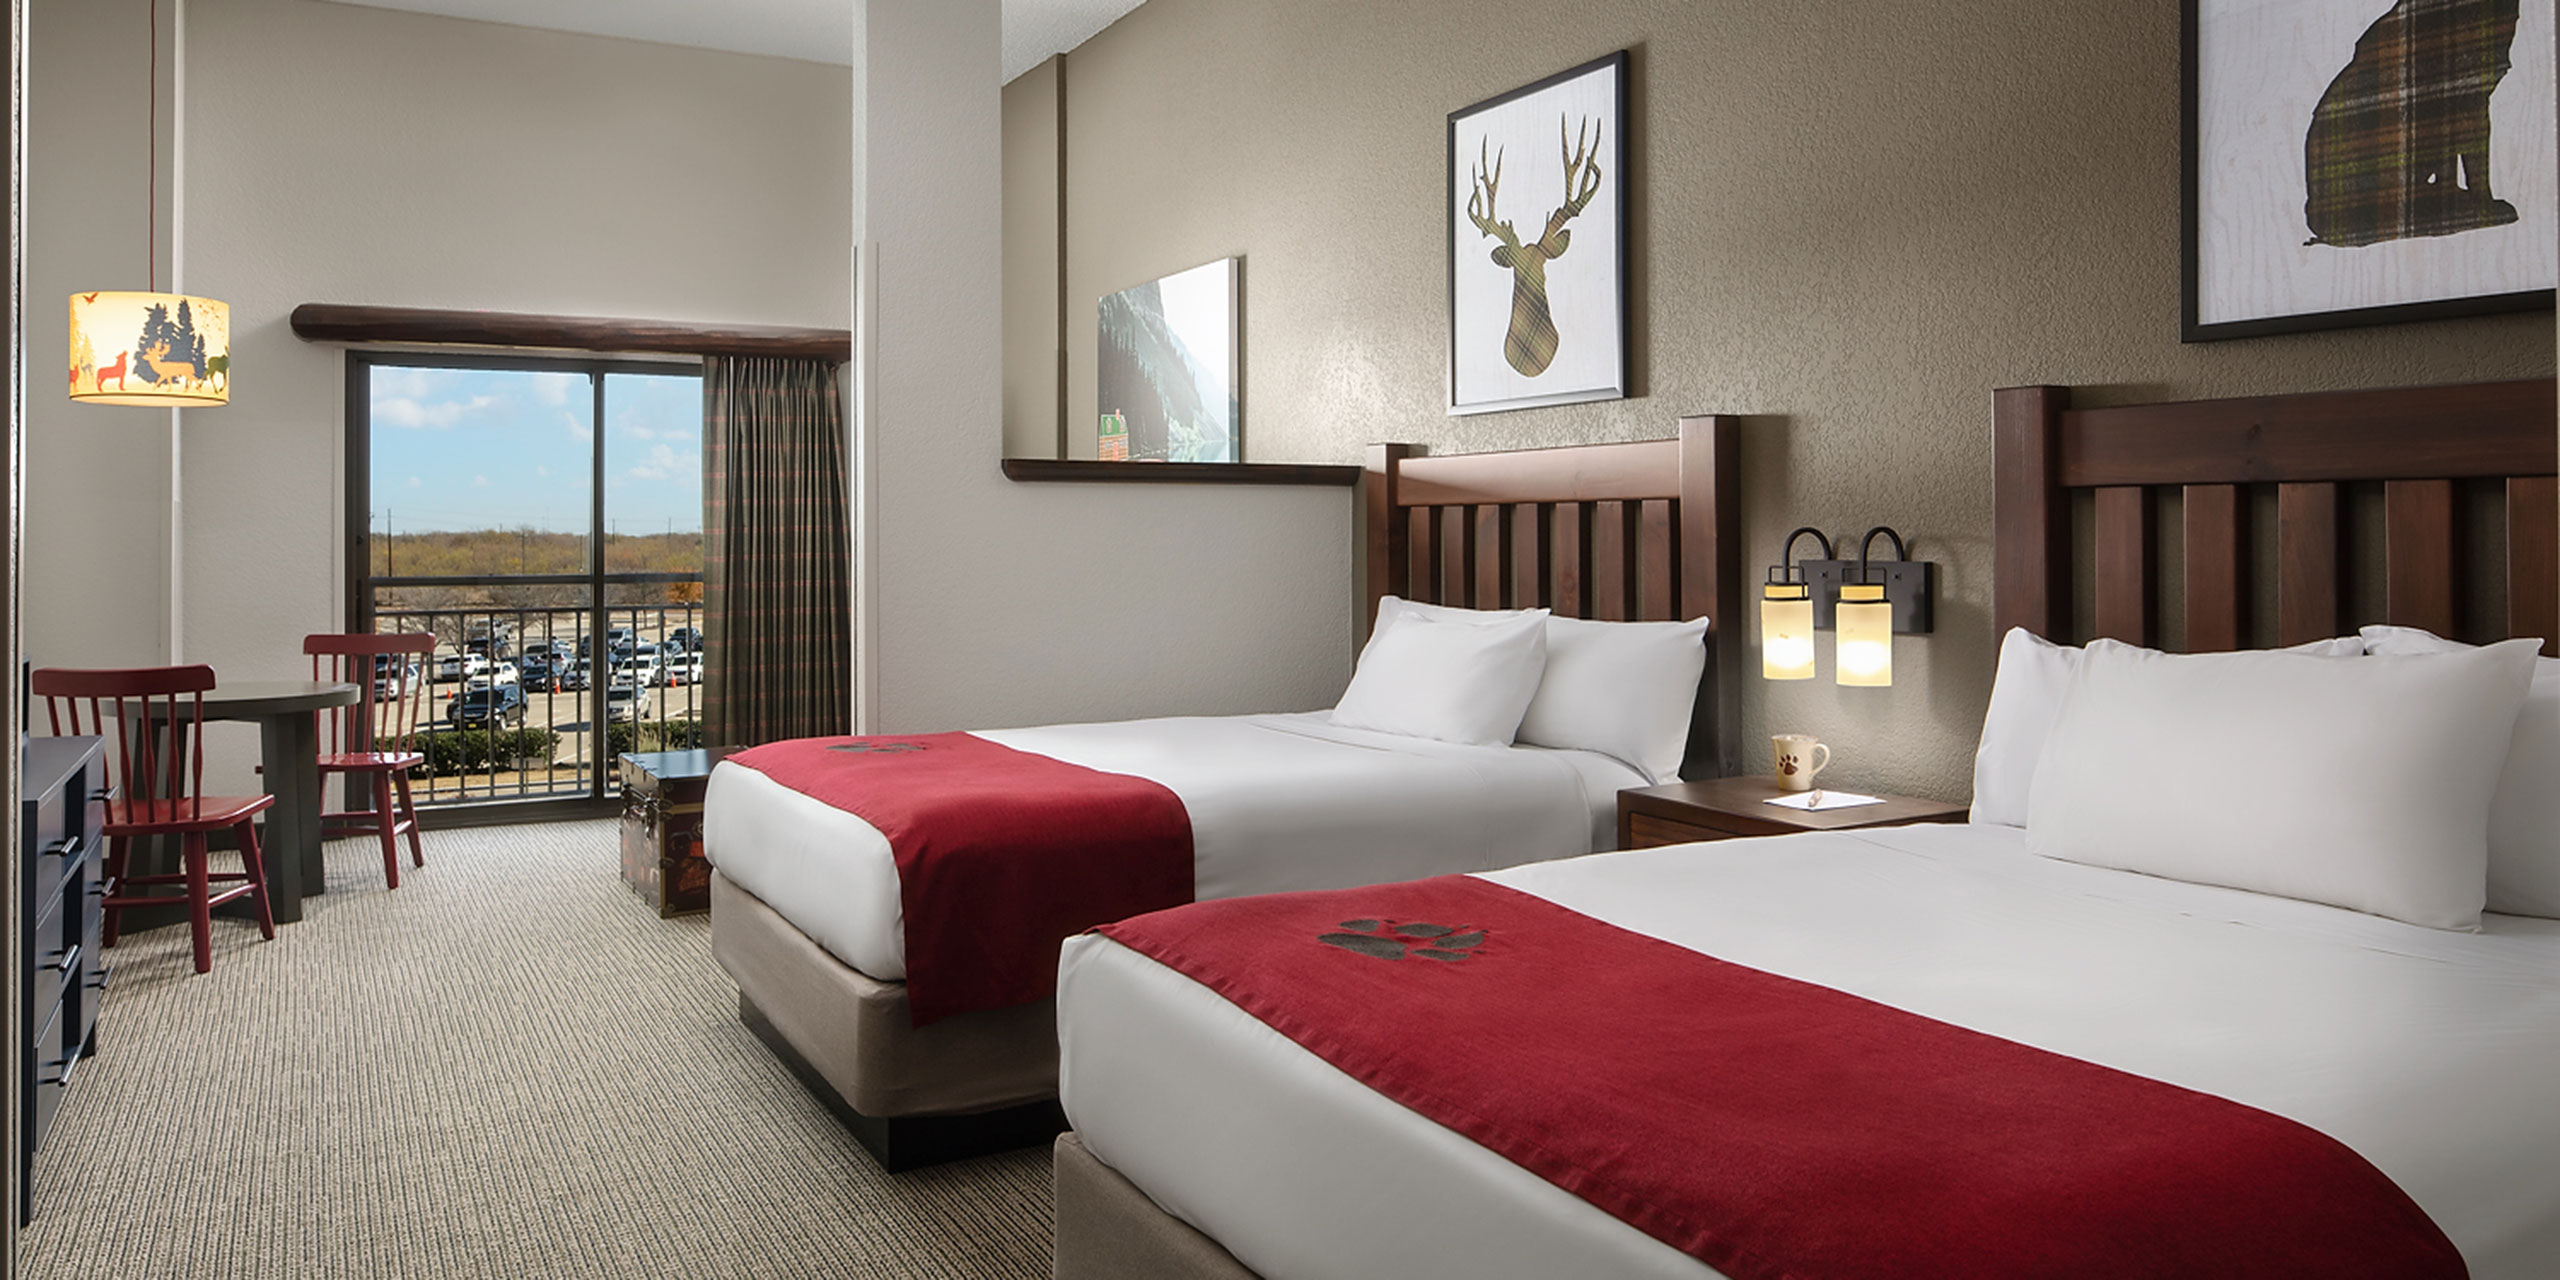 Guestroom Renovations at Great Wolf Lodge in the Pocono Mountains; Courtesy of Great Wolf Lodge